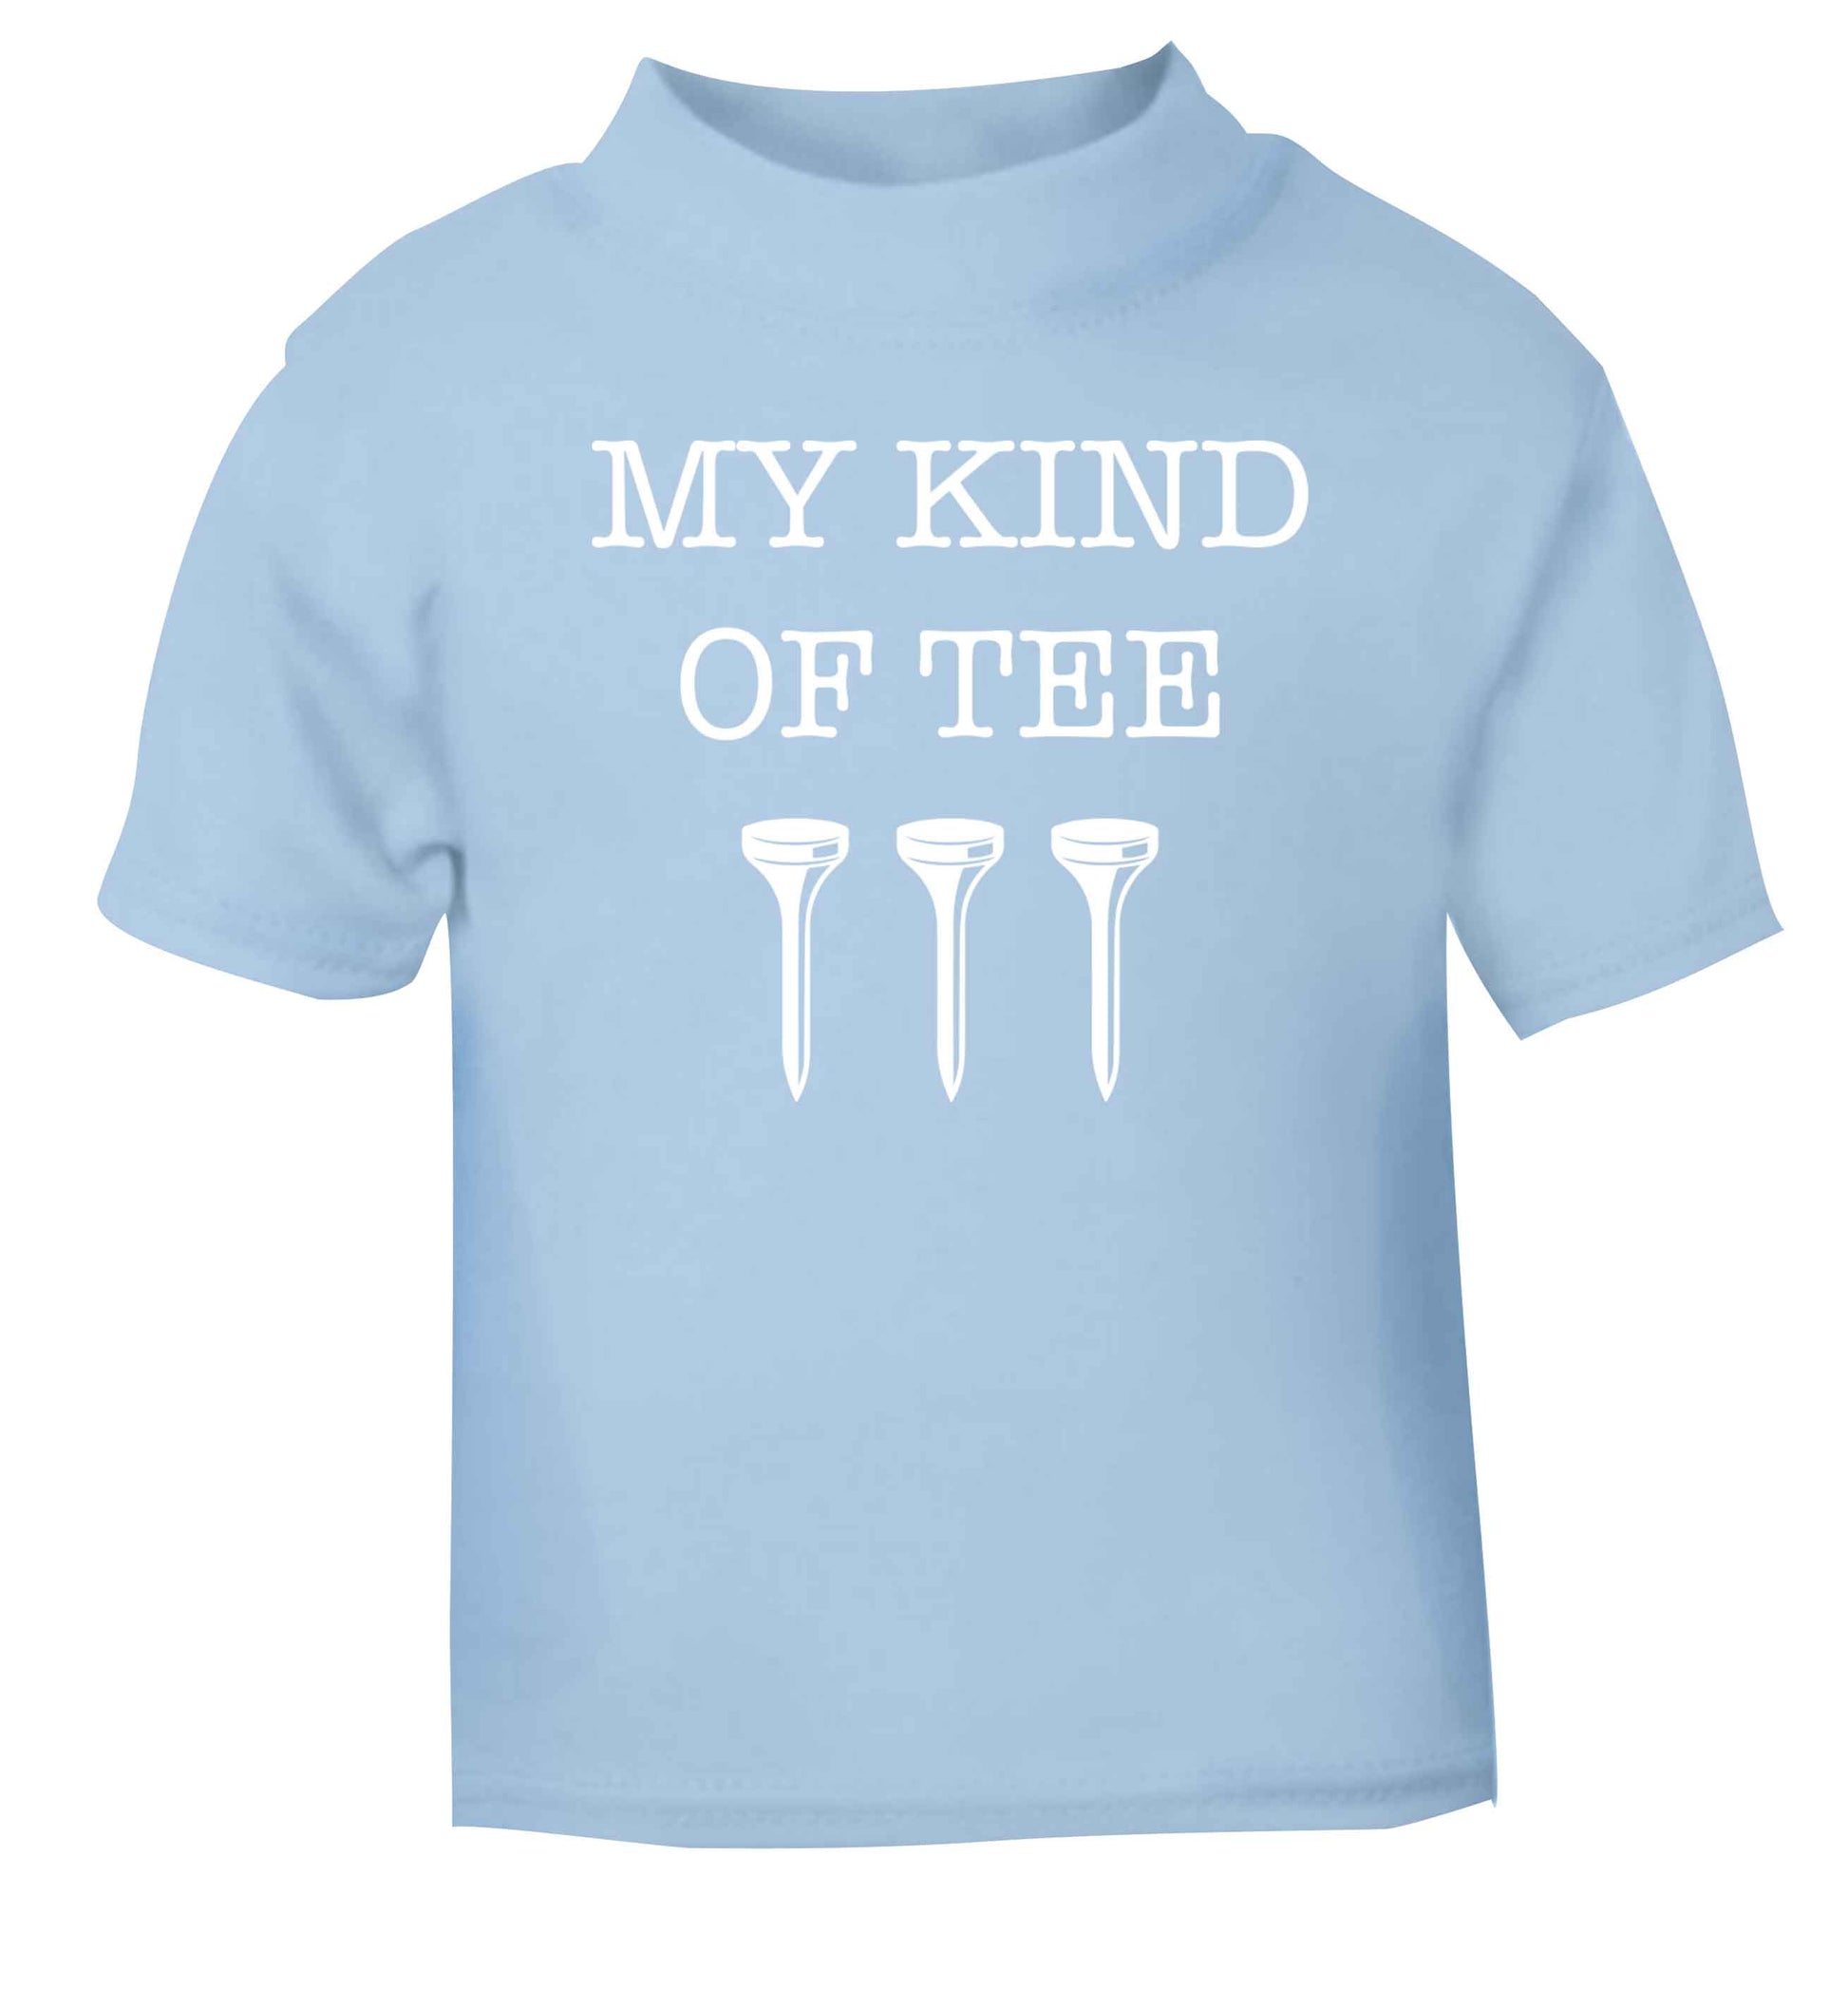 My kind of tee light blue Baby Toddler Tshirt 2 Years